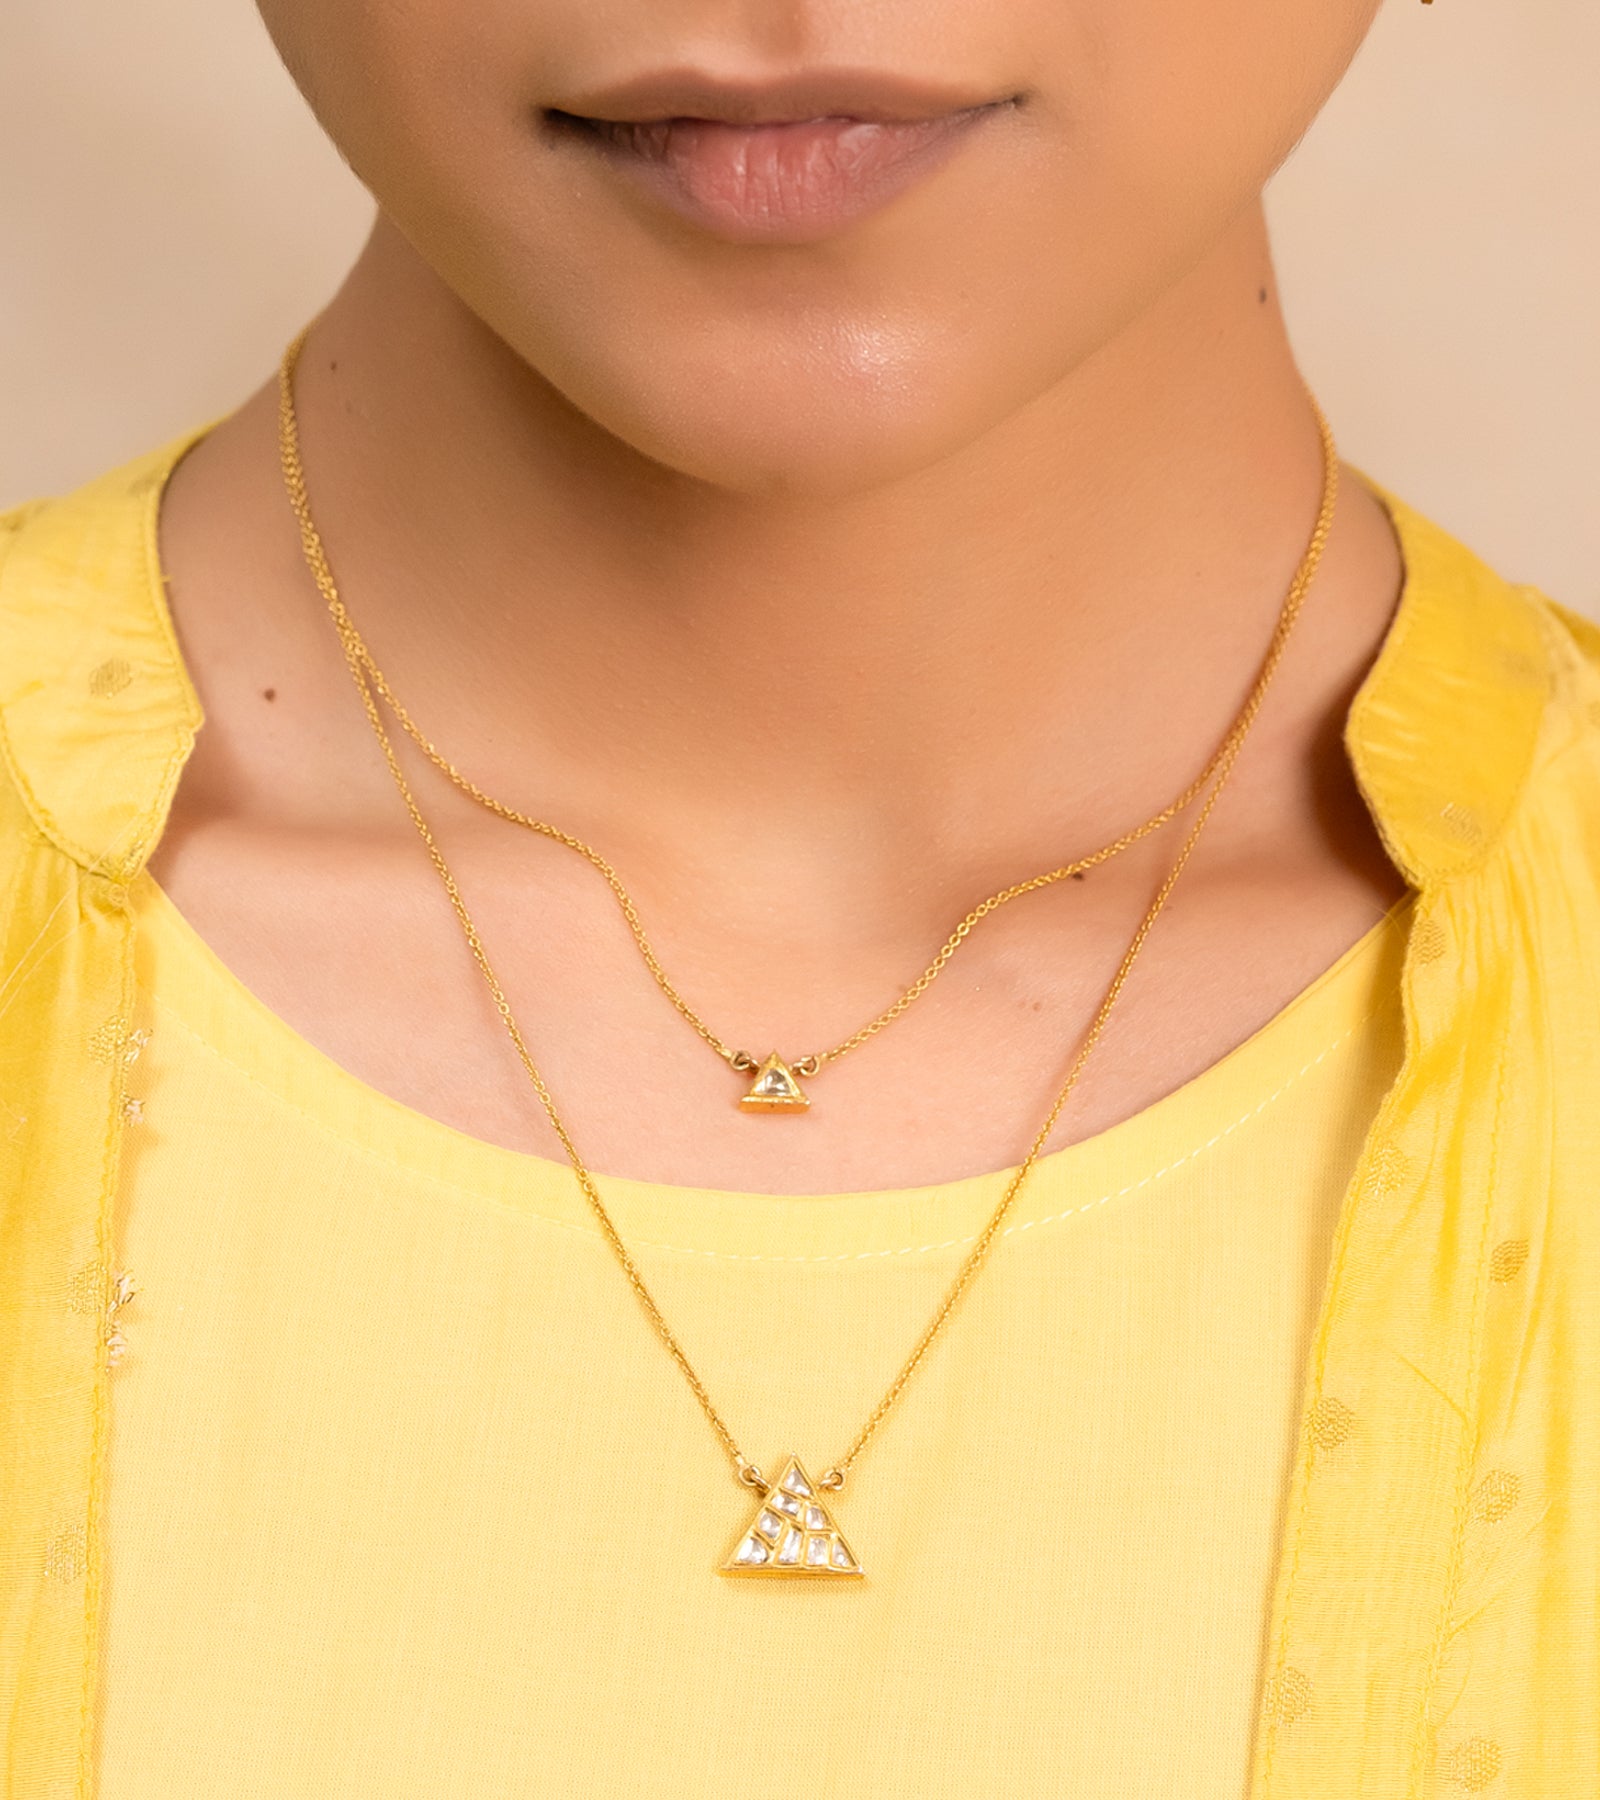 Indian Gold Necklace by UNCUT Jewelry